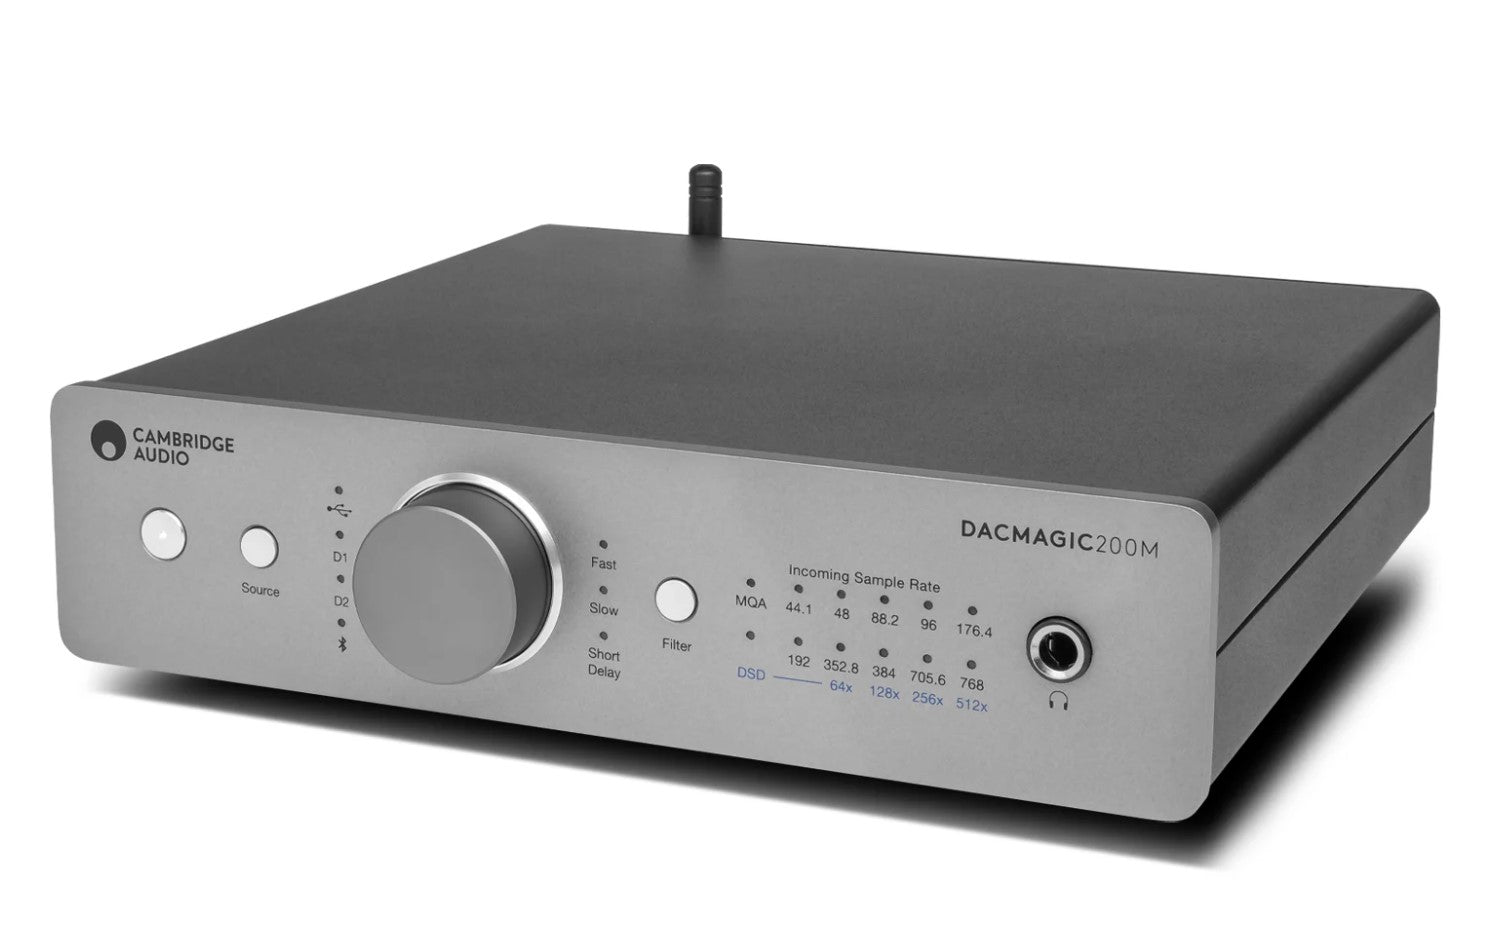 Cambridge Audio DAC200M-RB DacMagic 200M Stereo Digital to Analogue Converter DAC Preamp, Headphone Amplifier, Built-in Bluetooth, Lunar Grey - Certified Refurbished